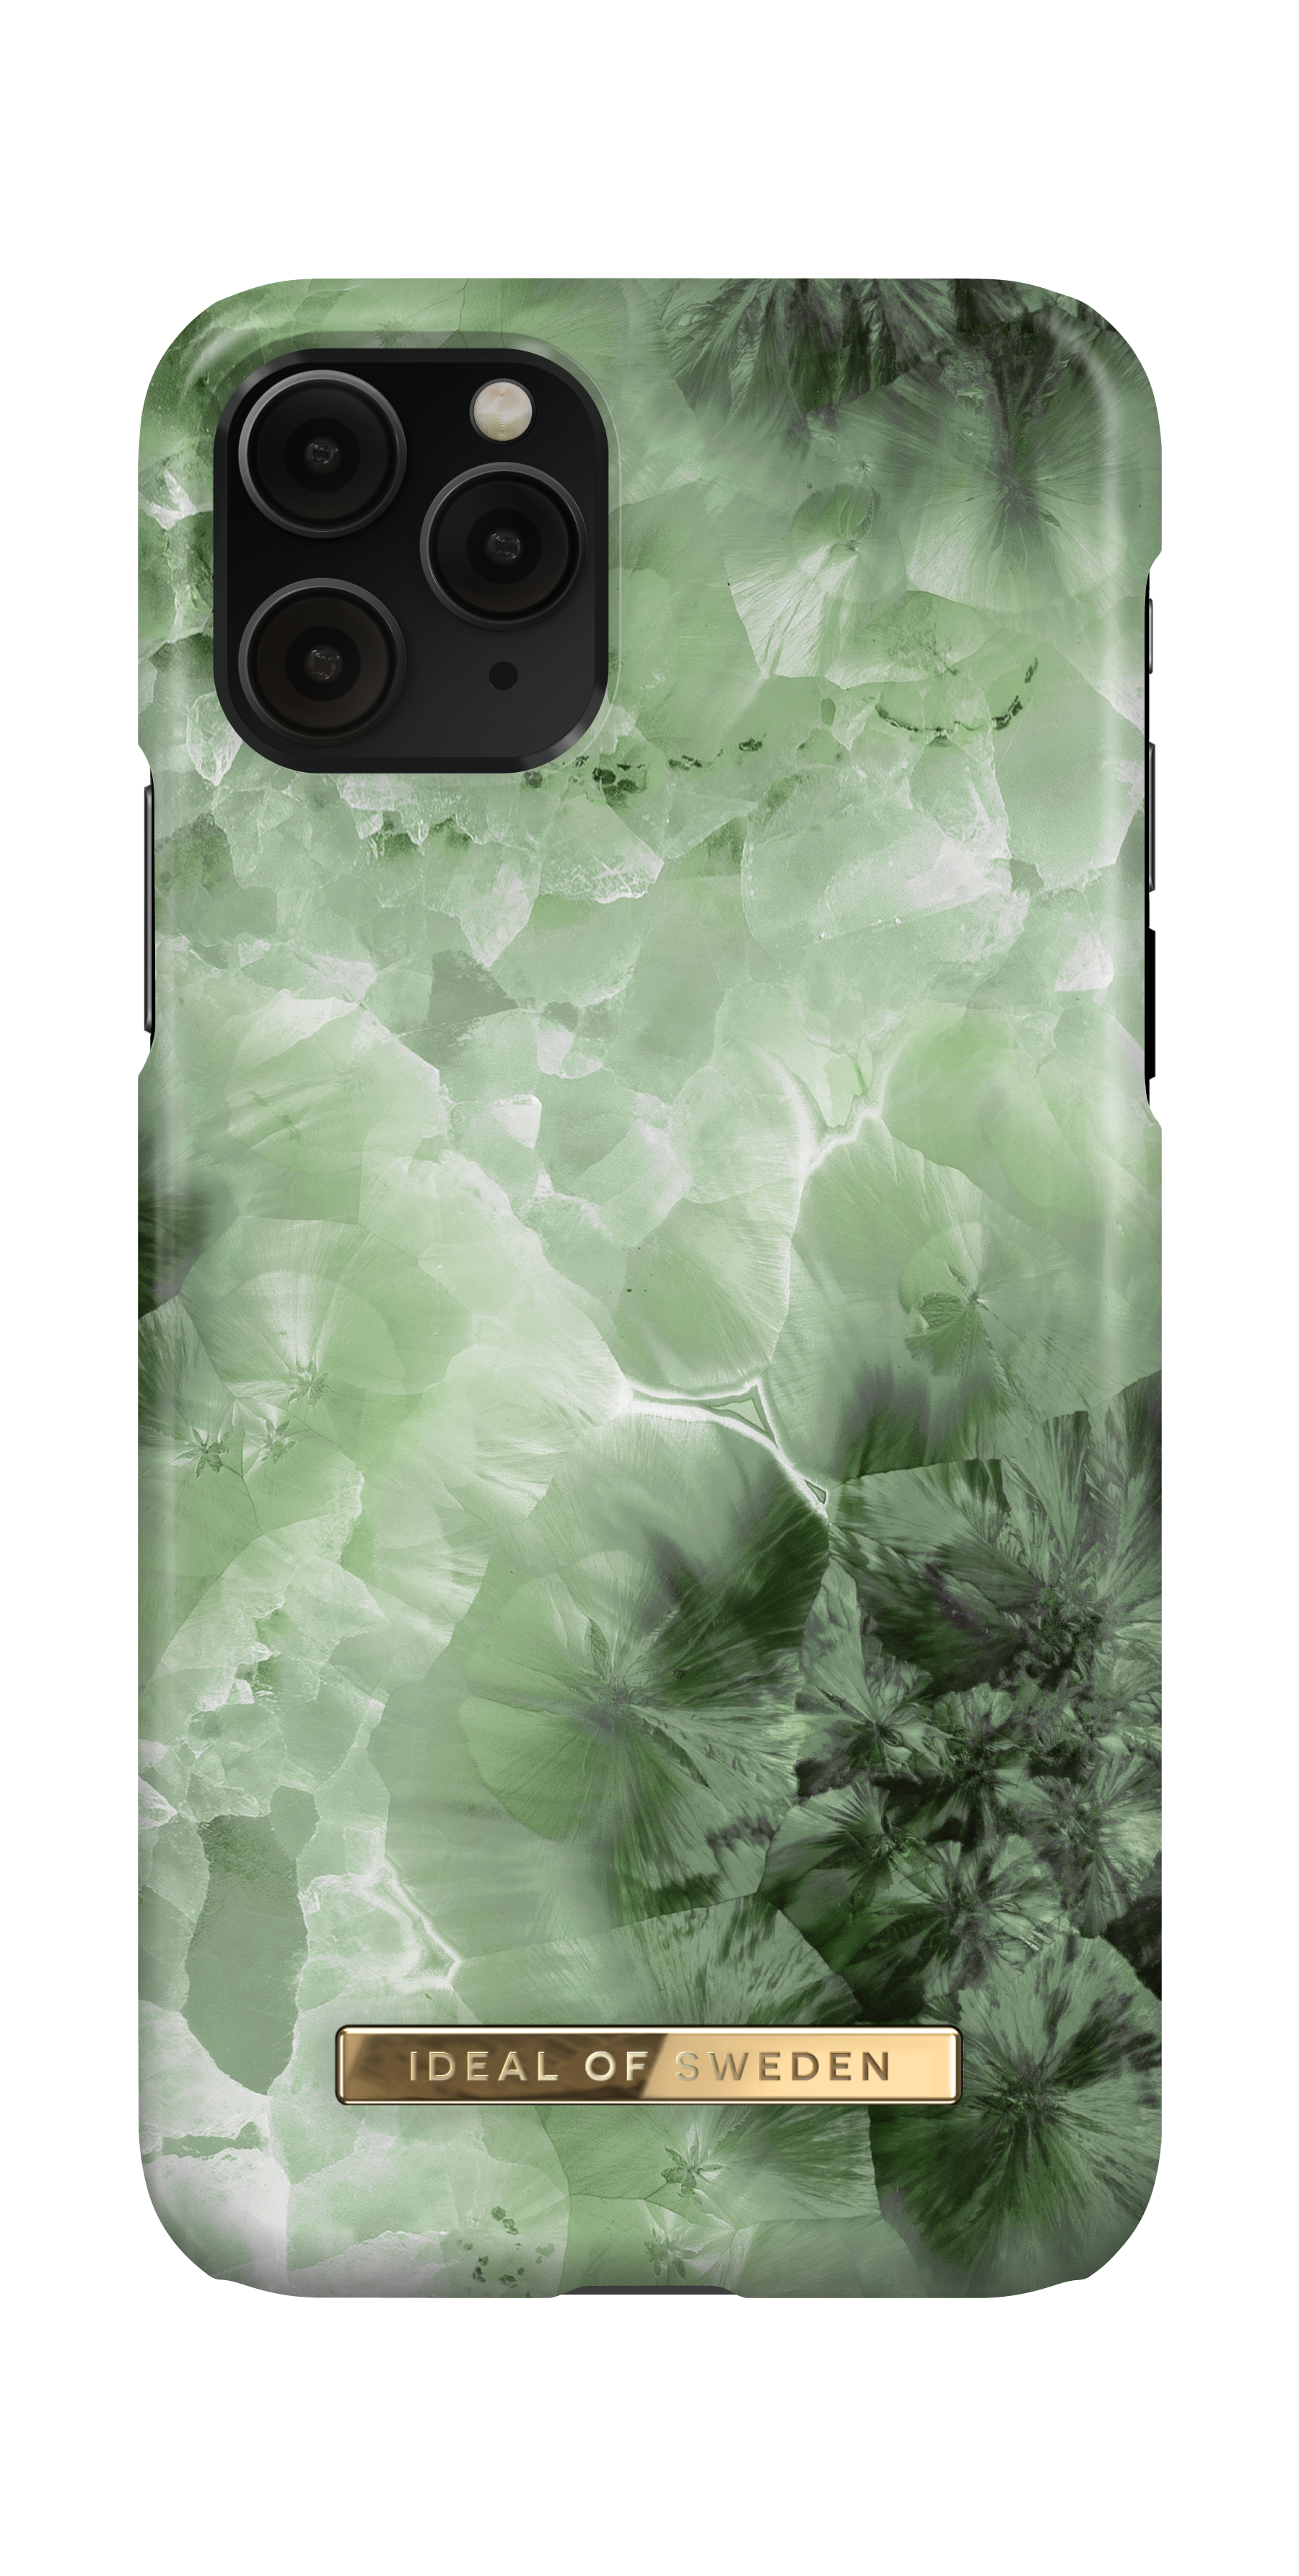 Apple, Green IDEAL X, Crystal iPhone Backcover, Sky IDFCAW20-1958-230, iPhone Pro, iPhone OF XS, 11 SWEDEN